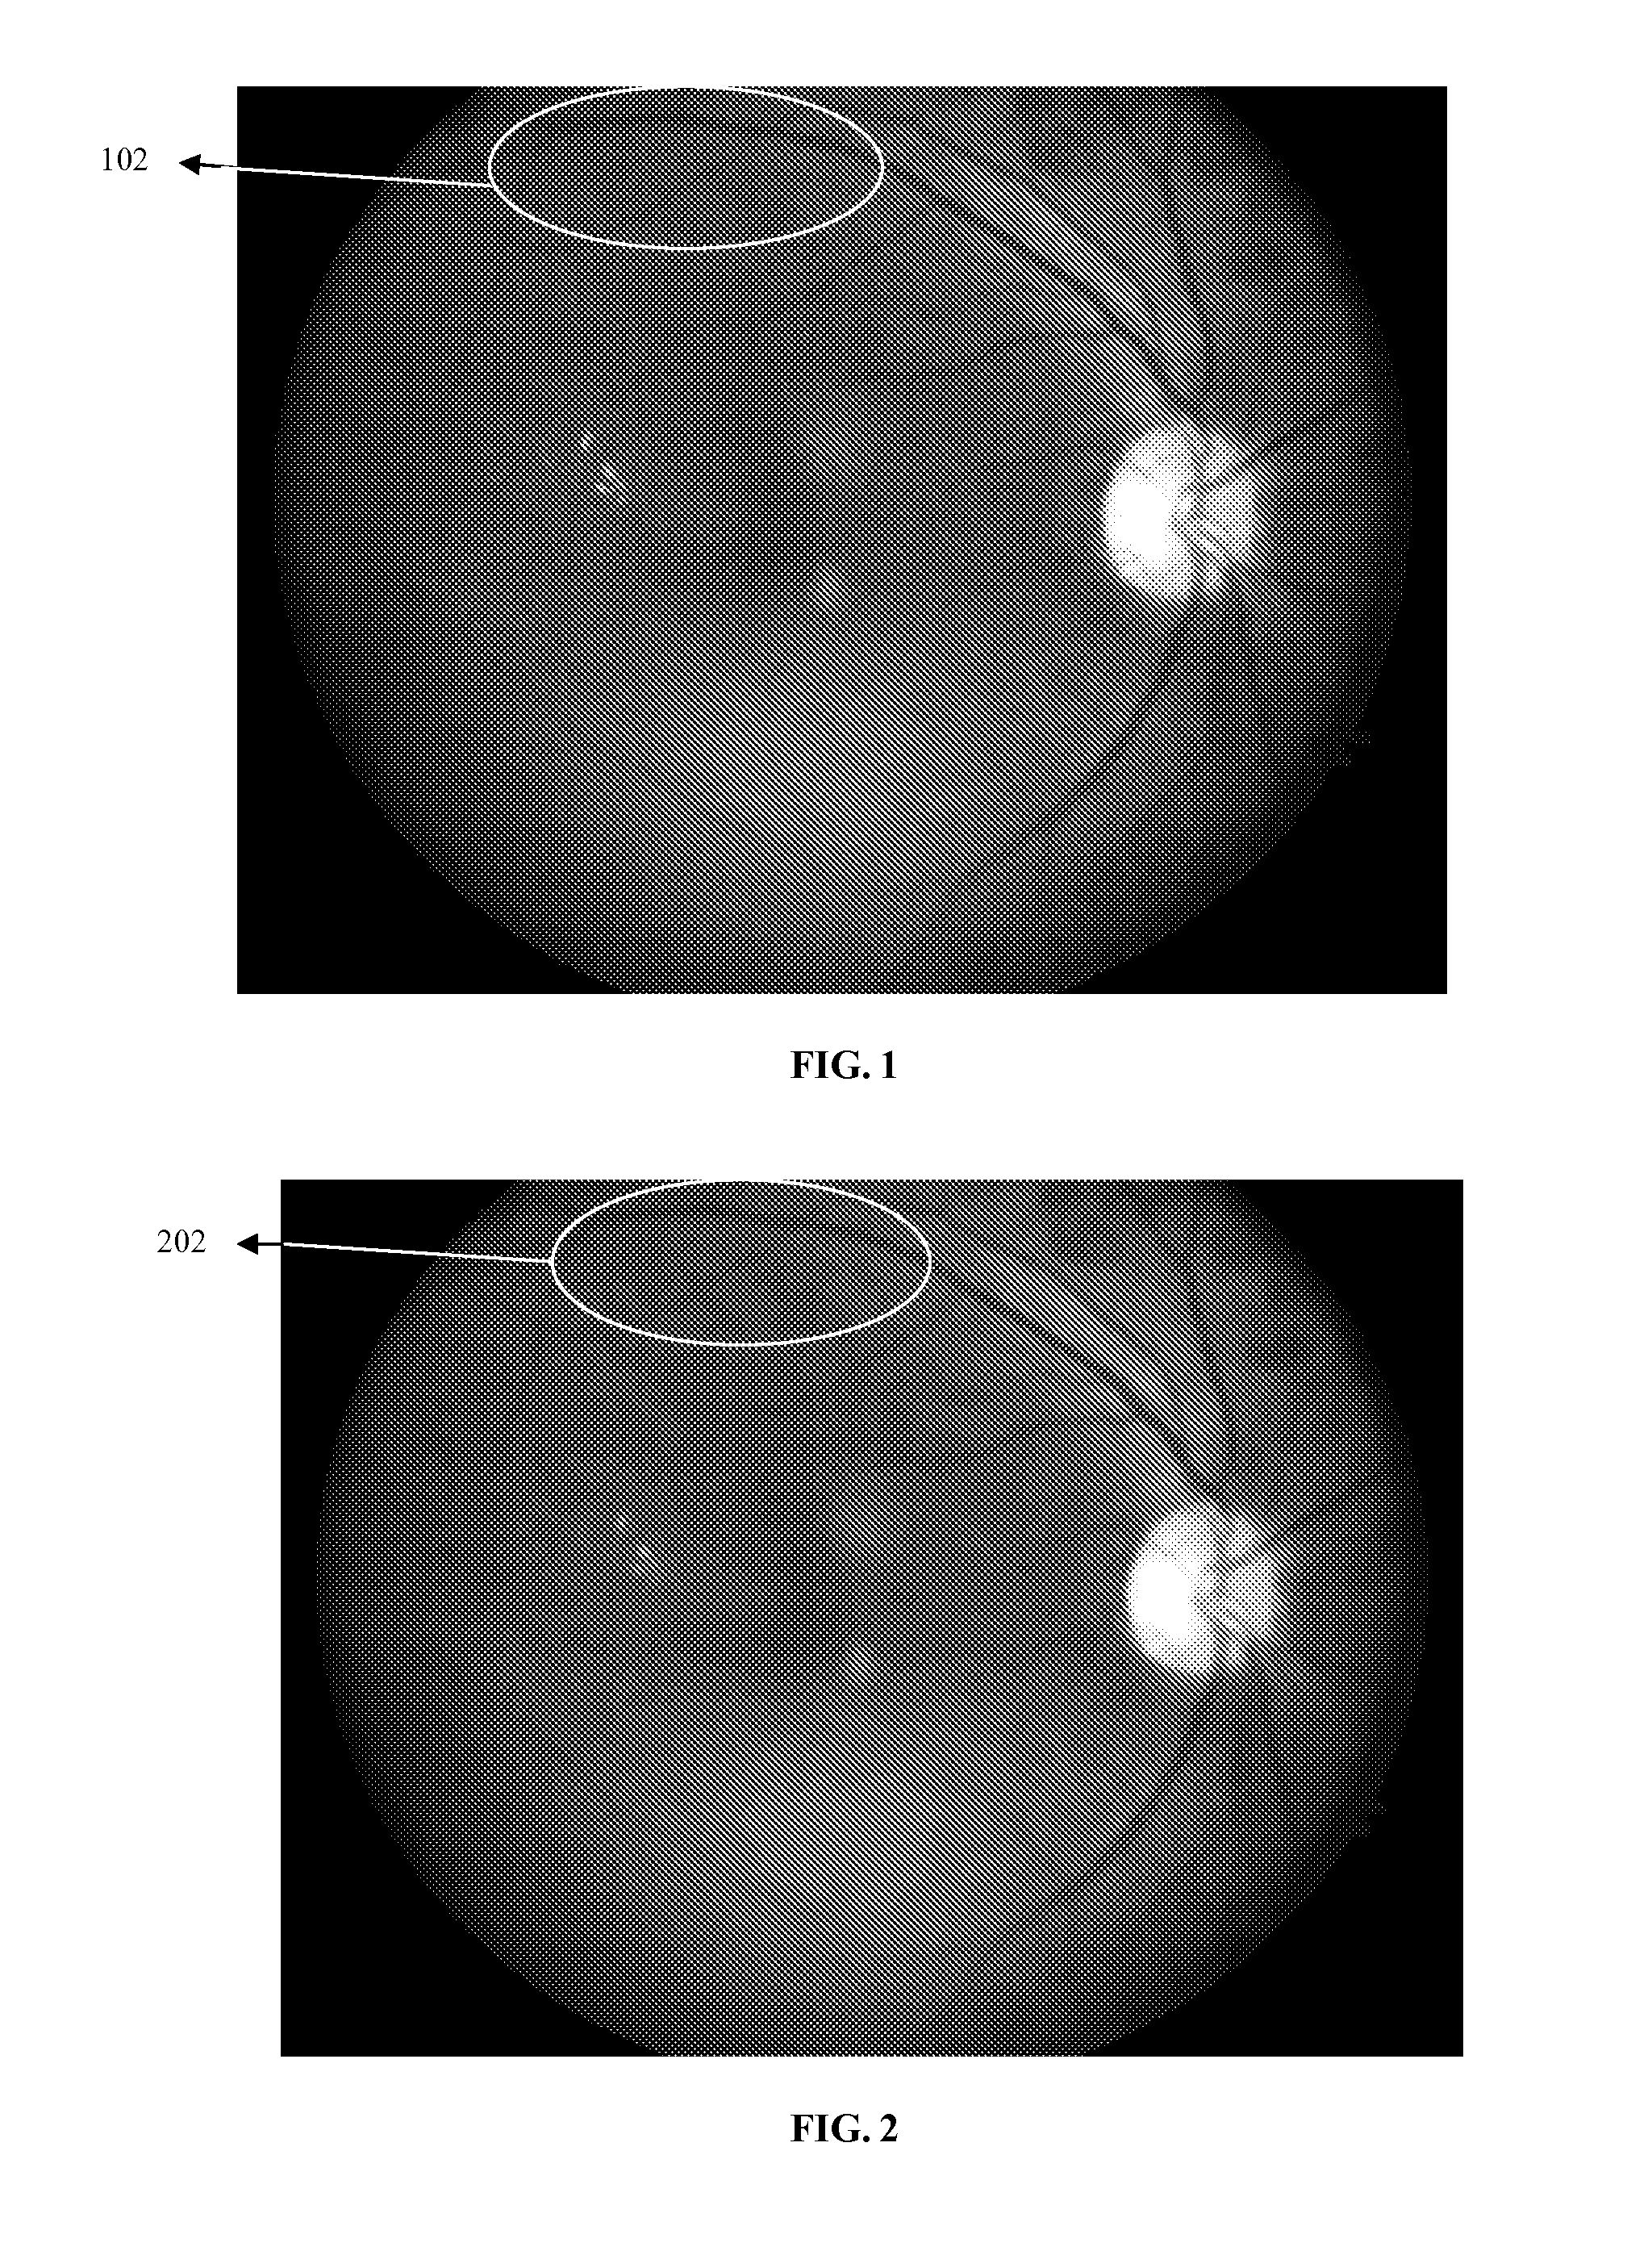 Method and system for enhancing image quality